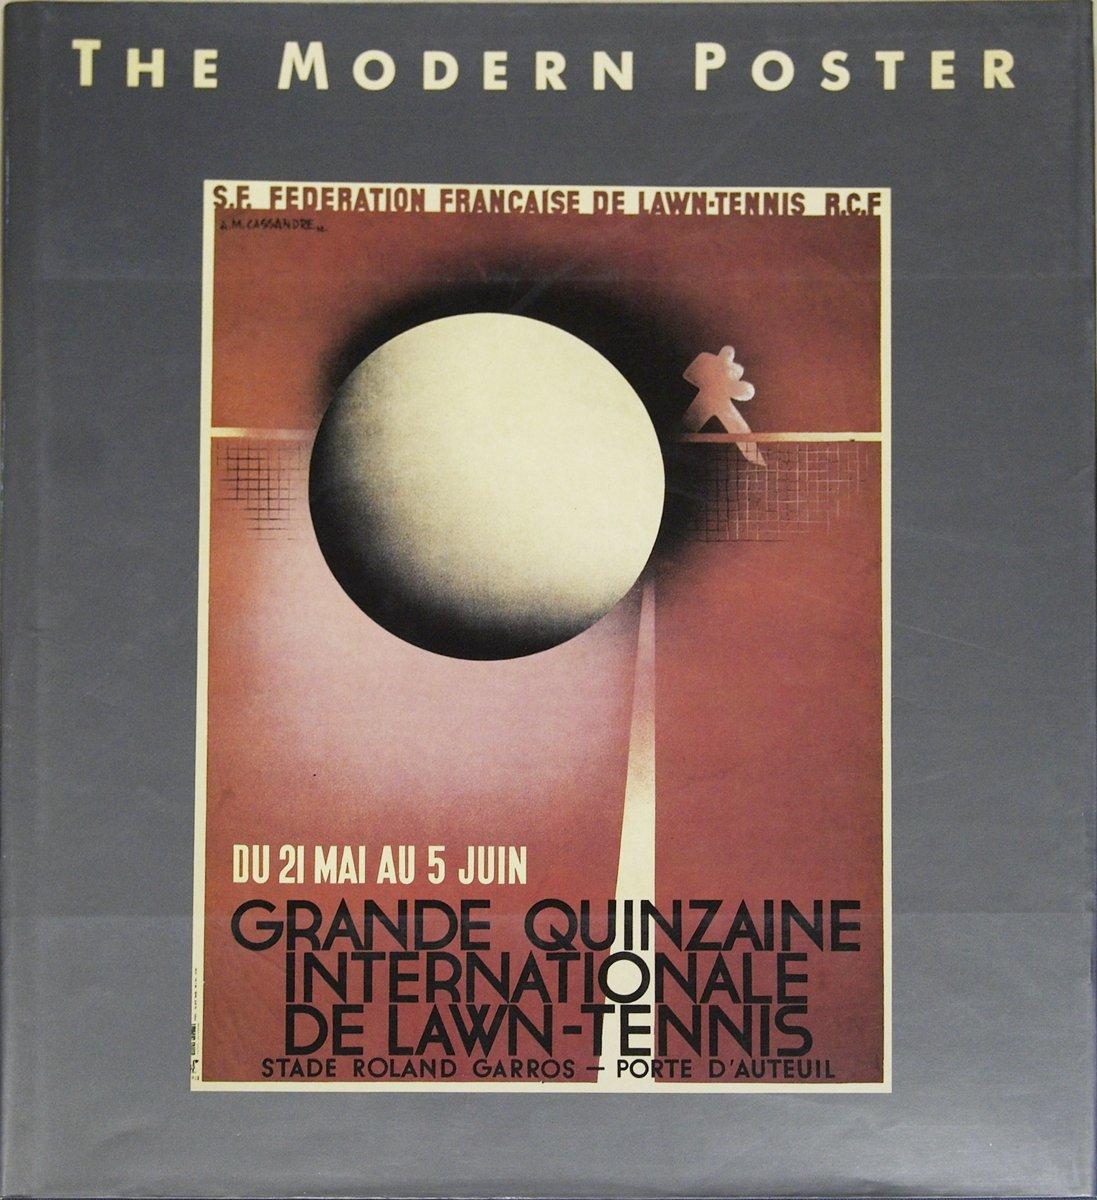 Paper Size: 12.25 x 11 inches ( 31.115 x 27.94 cm )
 Image Size: 9.5 x 7 inches ( 24.13 x 17.78 cm )
 Framed: No
 Condition: A: Mint
 
 Additional Details: Splendid mammoth catalog celebrating the art of the poster from the late 19th century to the